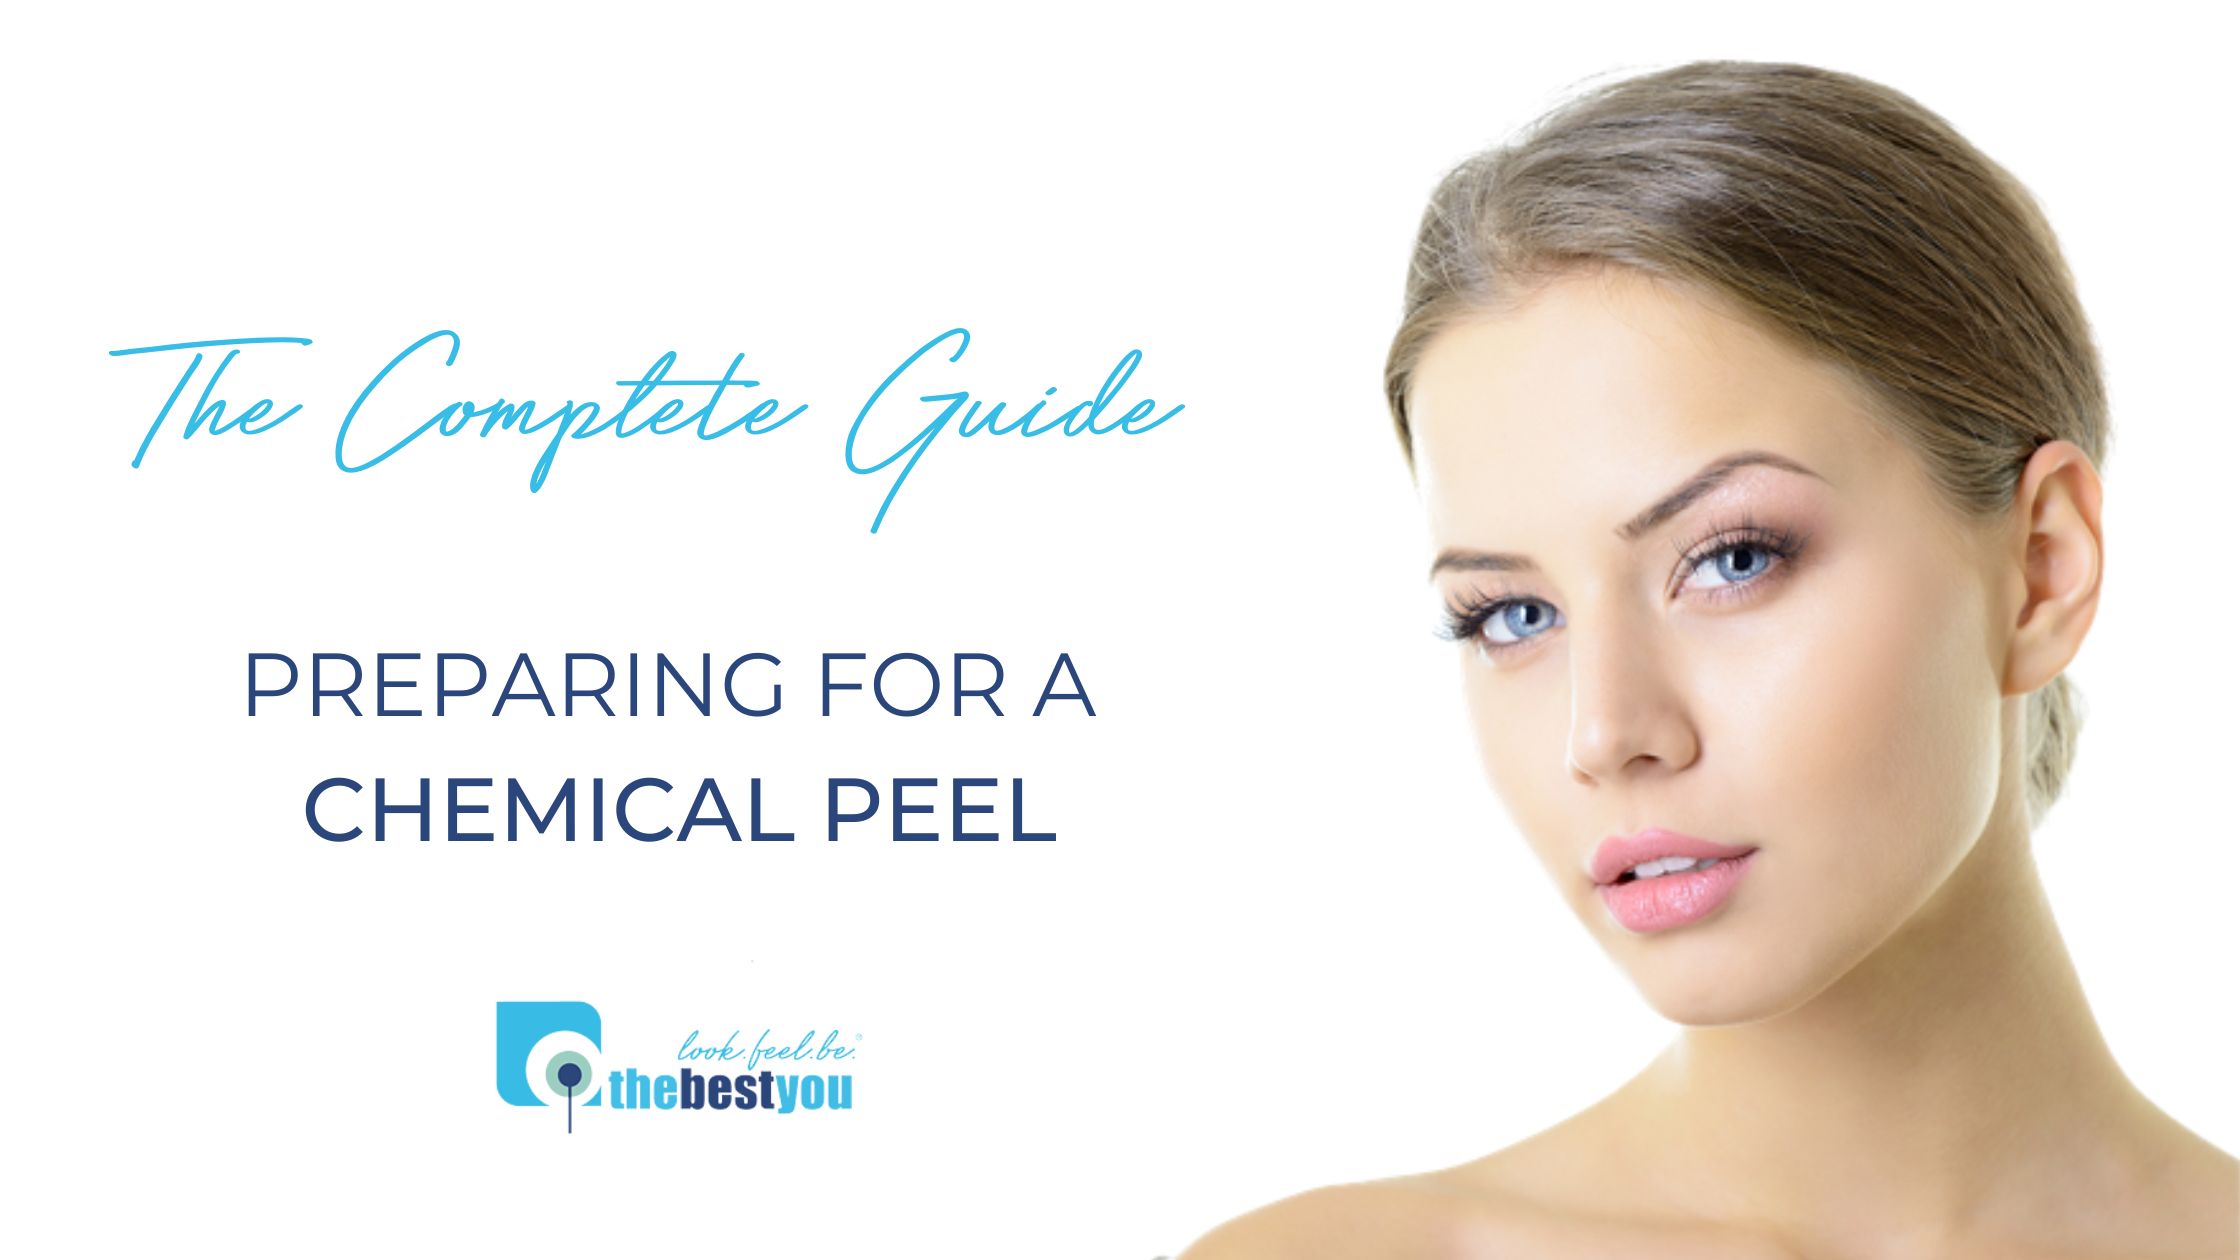 How to Prepare for a Chemical Peel